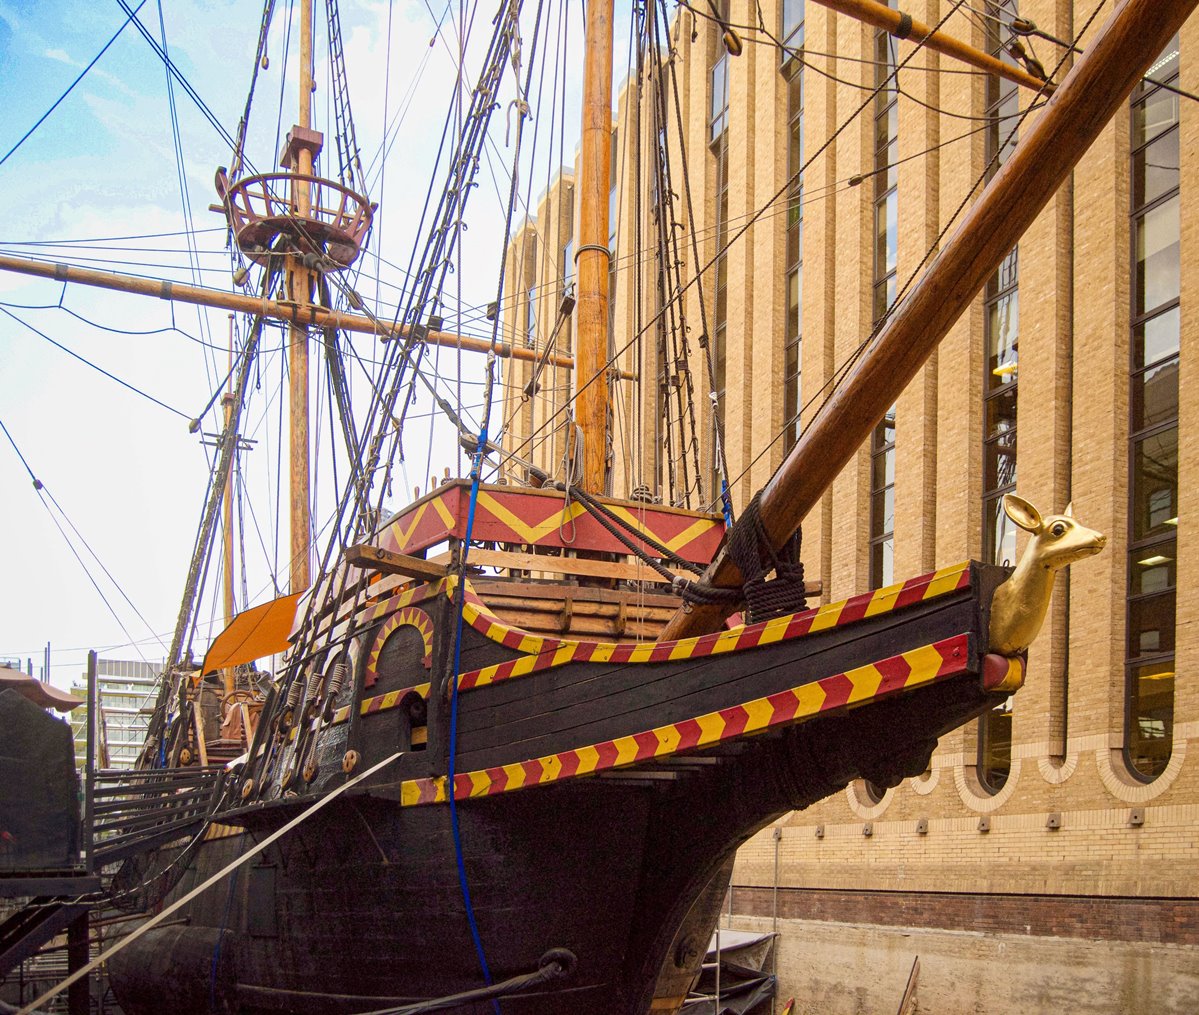 article thumb - The Golden Hinde ship - replica of a 16th century galleon